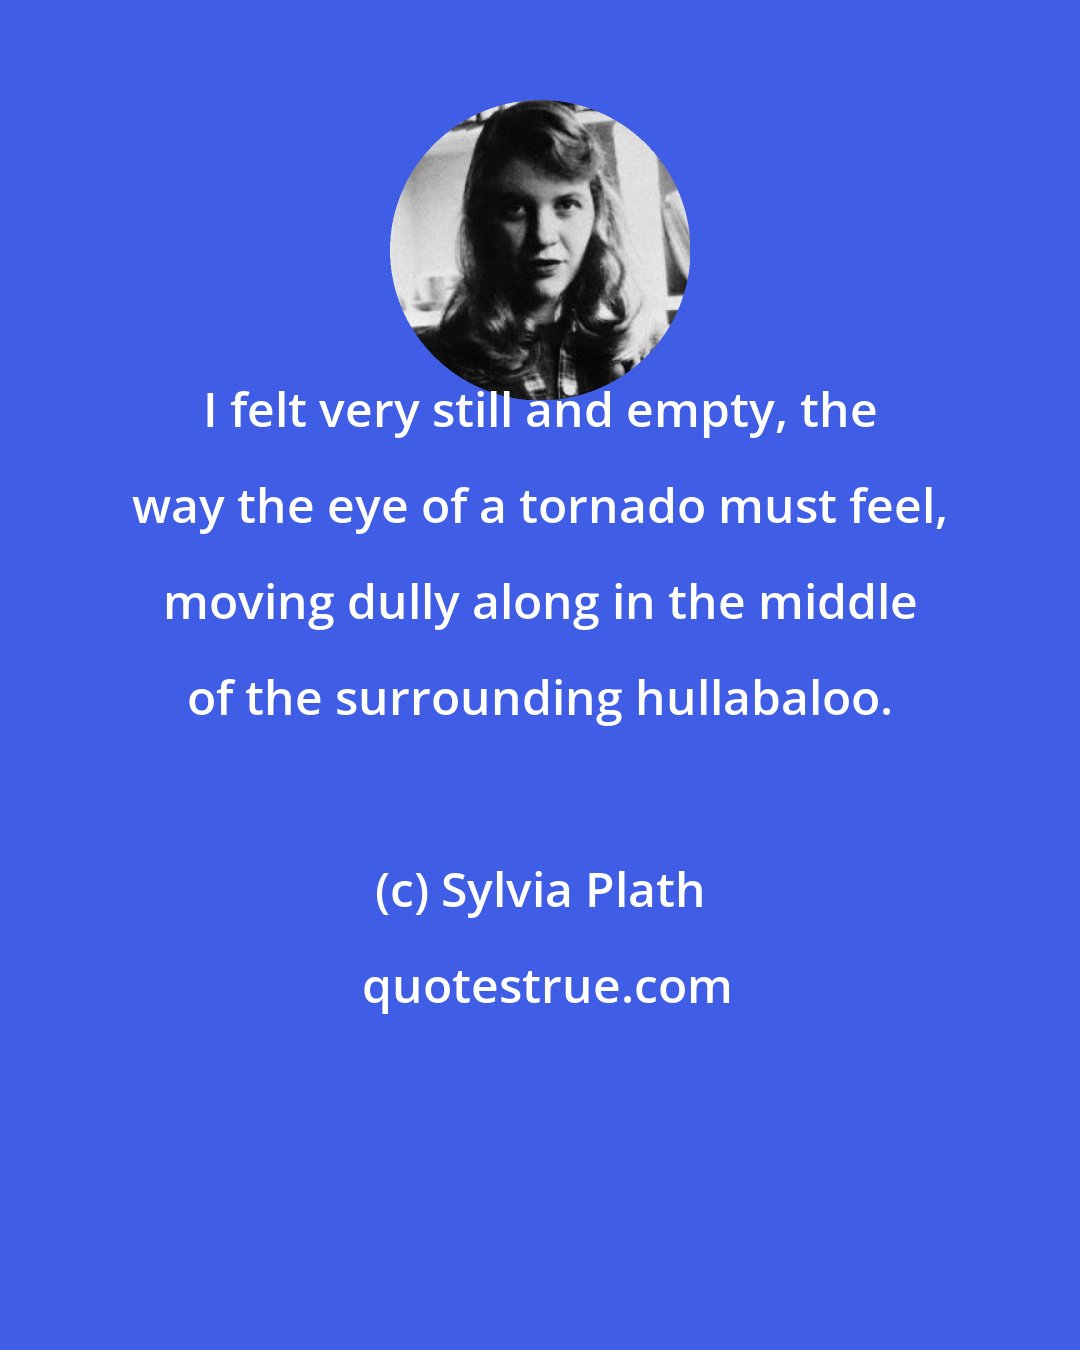 Sylvia Plath: I felt very still and empty, the way the eye of a tornado must feel, moving dully along in the middle of the surrounding hullabaloo.